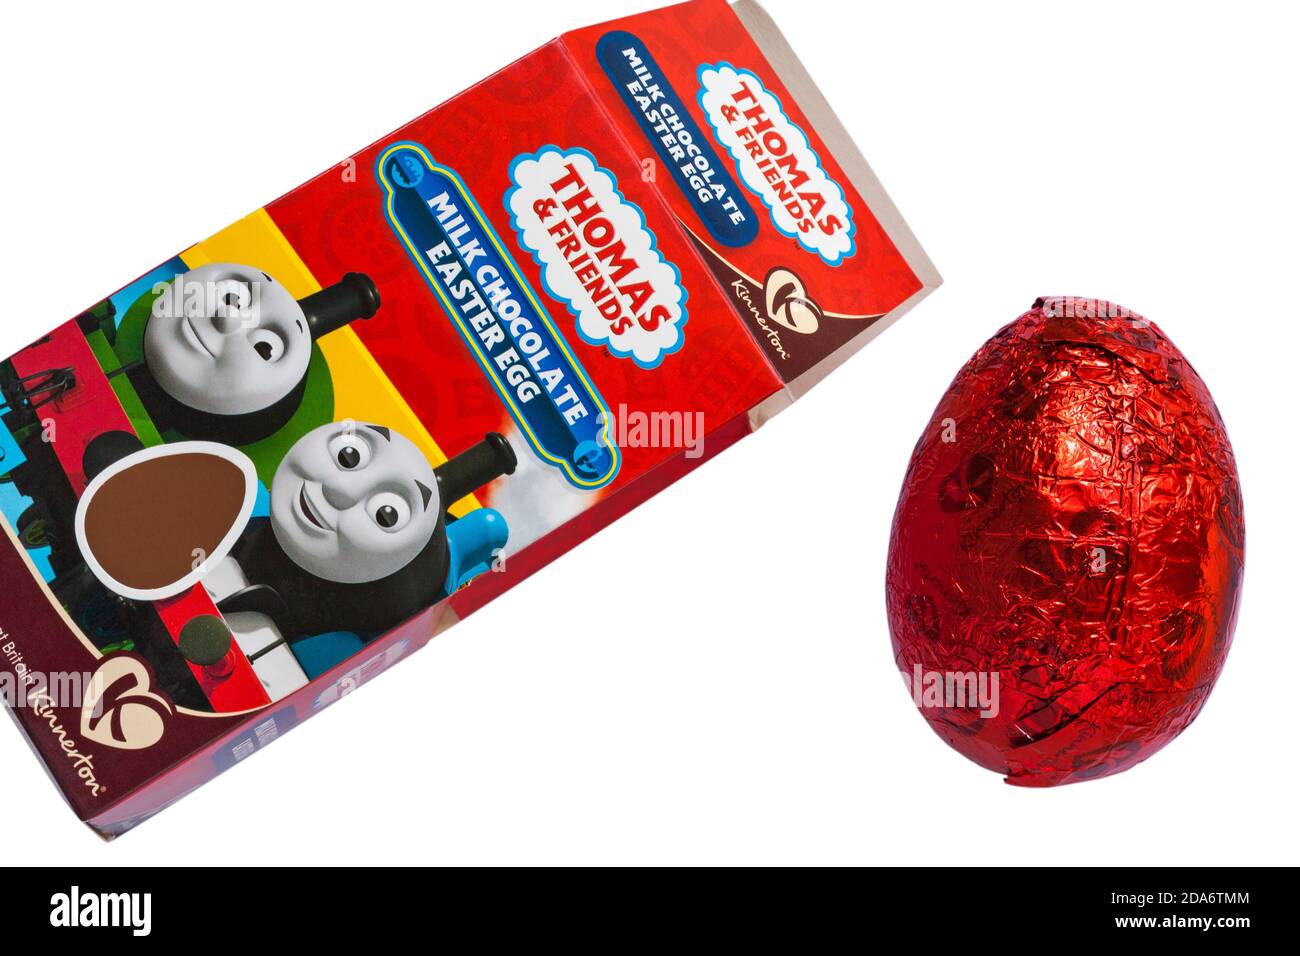 Kinnerton Thomas & Friends milk chocolate Easter Egg for Easter isolated on white background - foil wrapped Easter egg removed from box Stock Photo